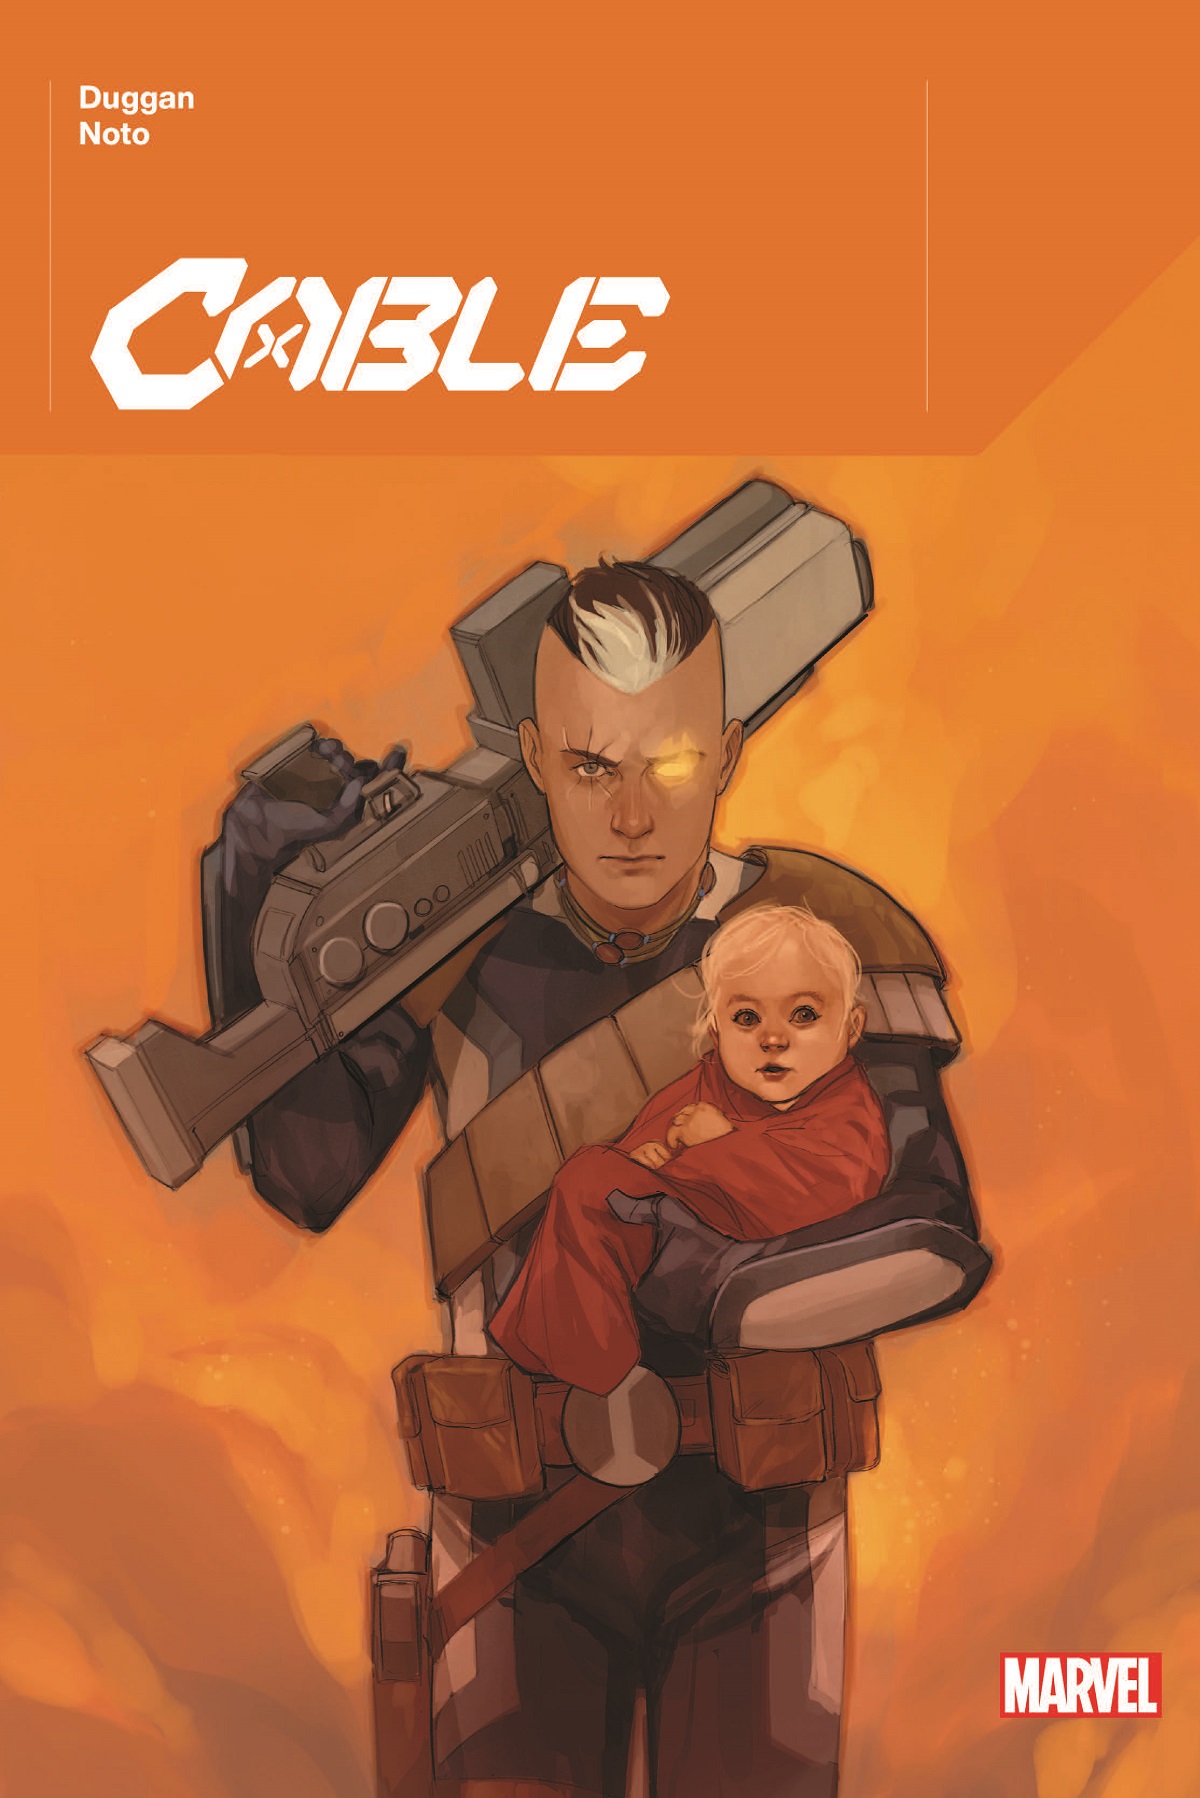 Cable By Duggan & Noto (Hardcover)